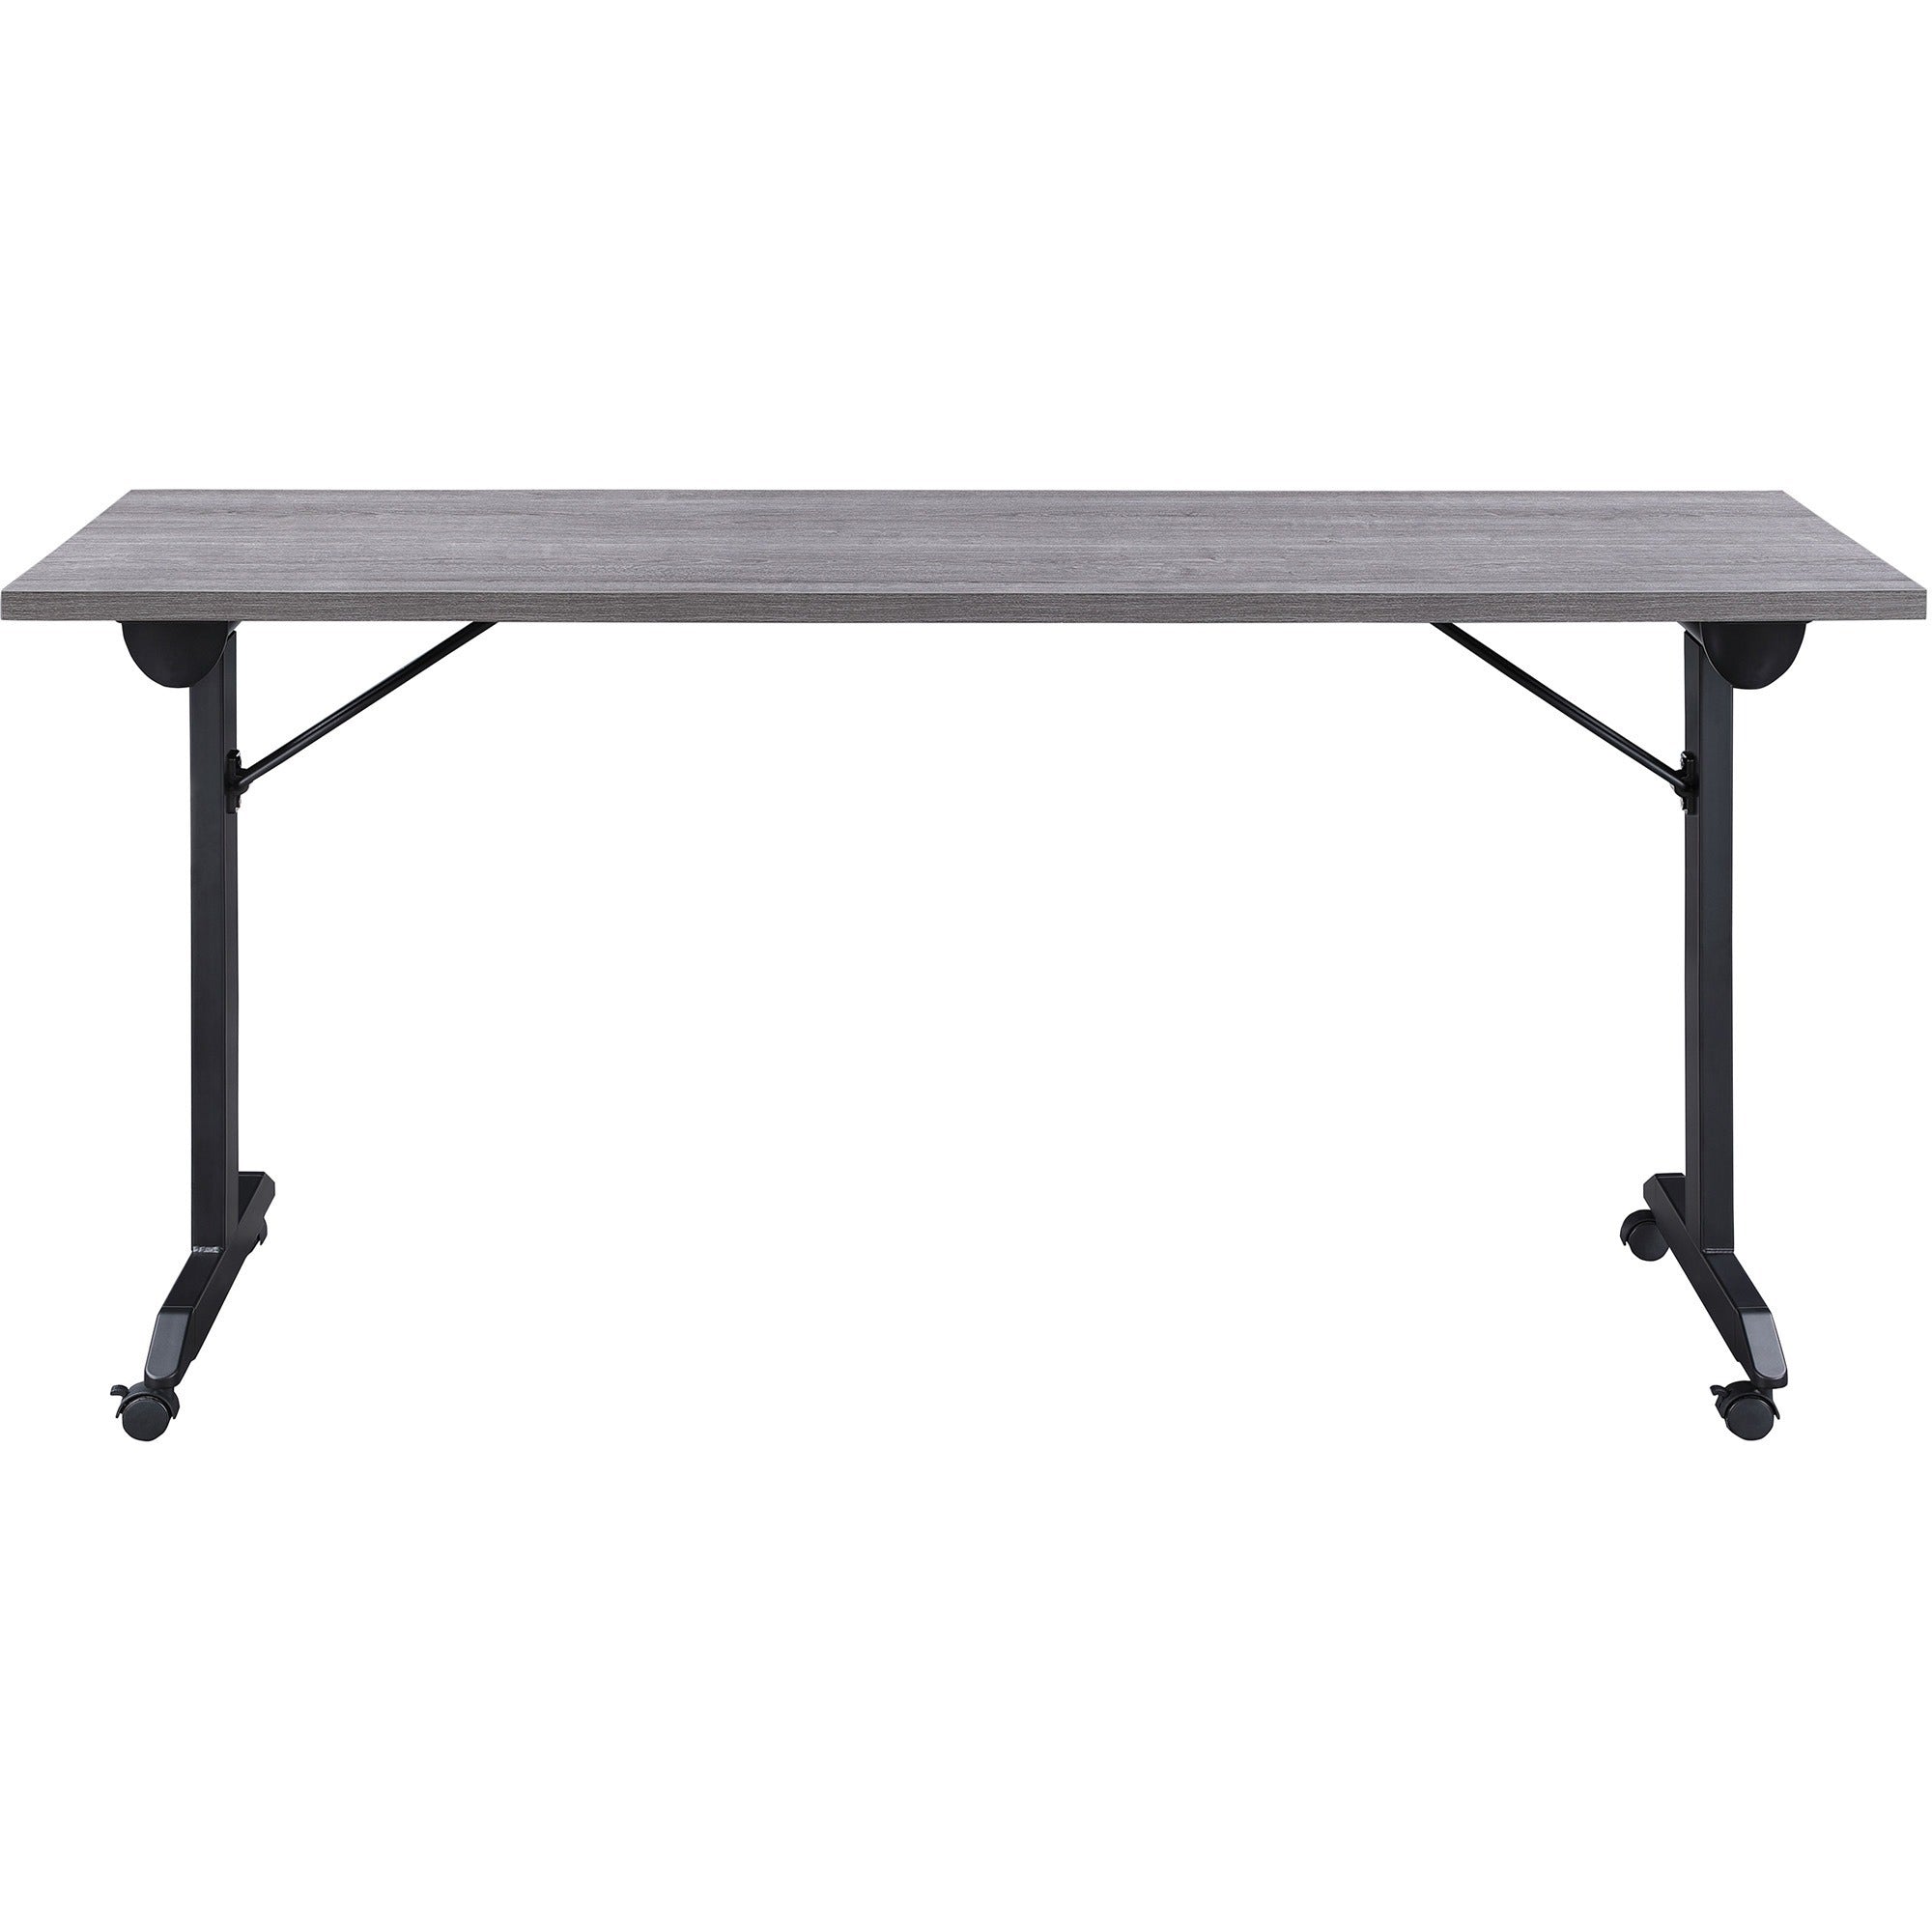 lorell-mobile-folding-training-table-for-table-toprectangle-top-powder-coated-base-200-lb-capacity-x-63-table-top-width-2950-height-x-63-width-x-2950-depth-assembly-required-gray-1-each_llr60741 - 3